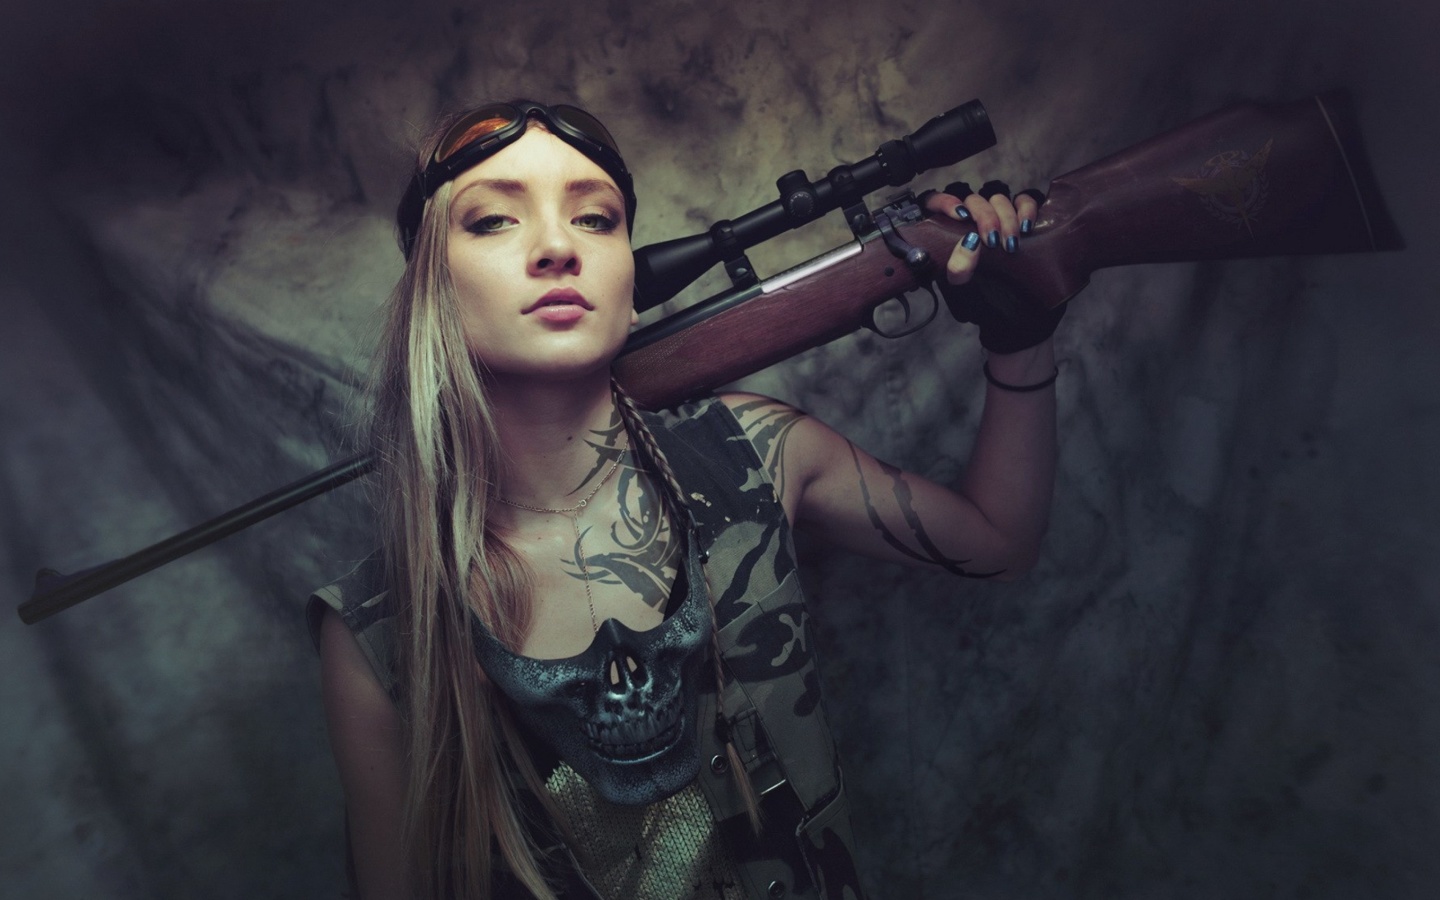 Soldier girl with a sniper rifle wallpaper 1440x900